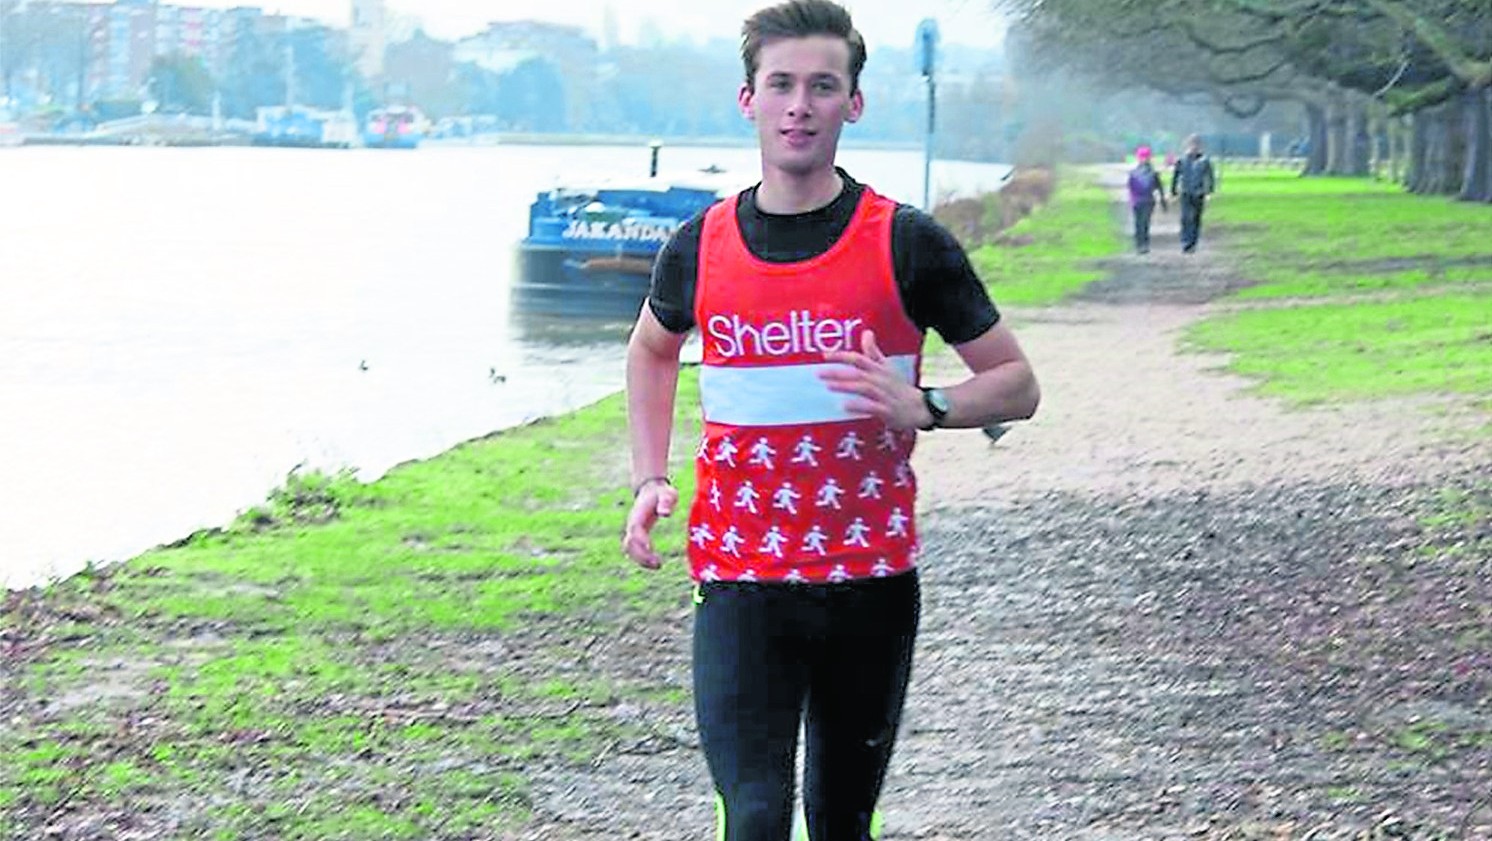 Kingston student to run 2015 miles in 2015 for homeless charity